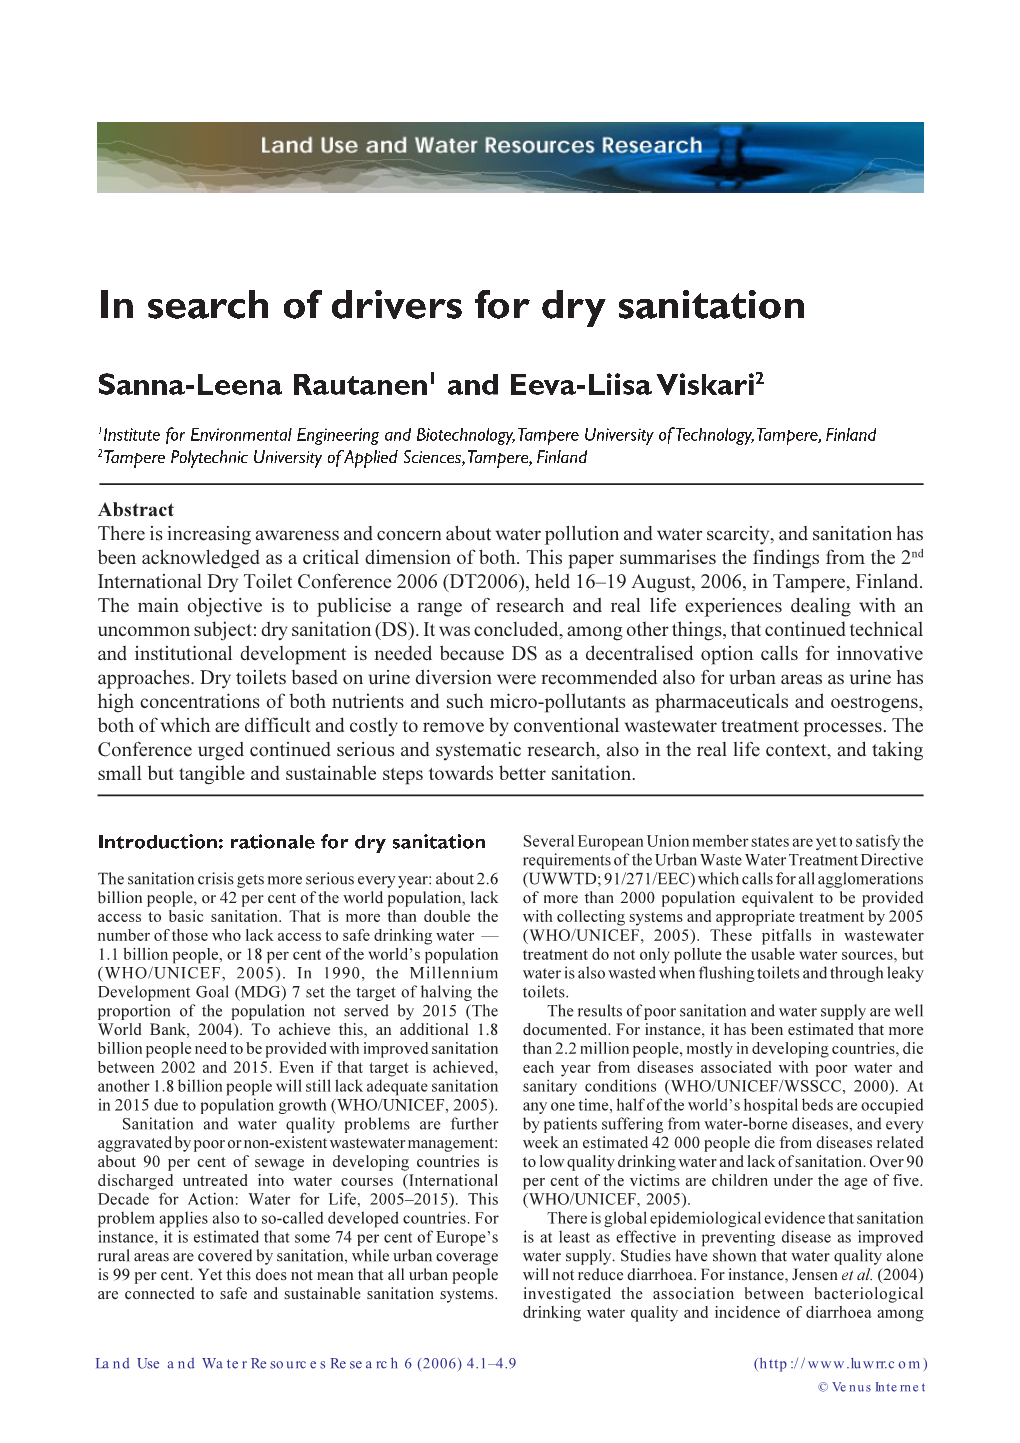 In Search of Drivers for Dry Sanitation